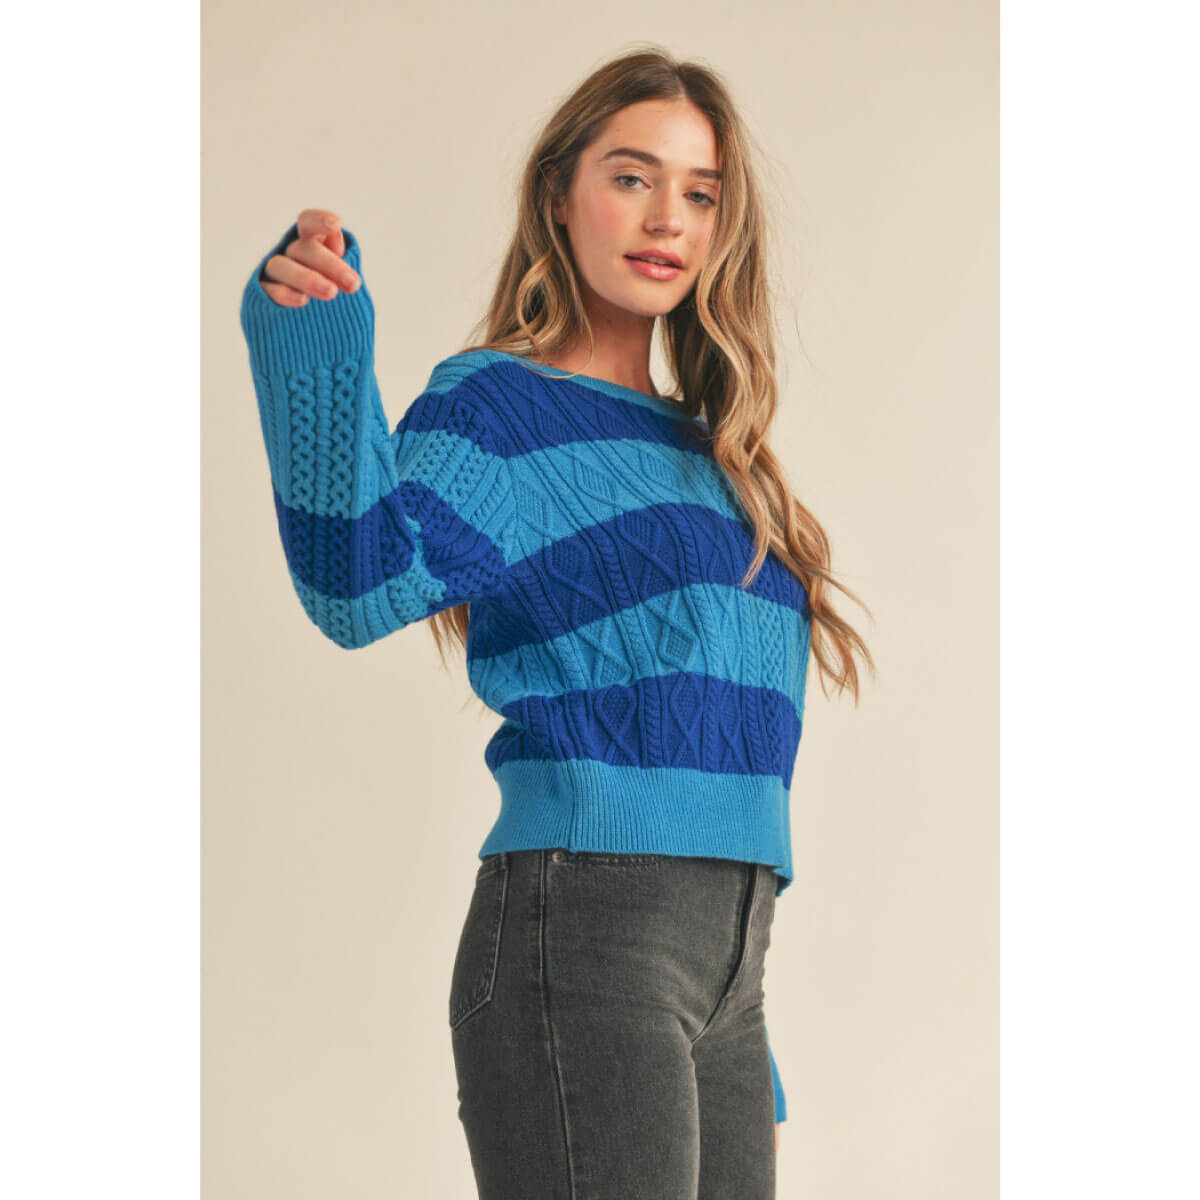 Striped Cable Knit Pullover Sweater blue side | MILK MONEY milkmoney.co | cute sweaters for women, cute knit sweaters, cute pullover sweaters